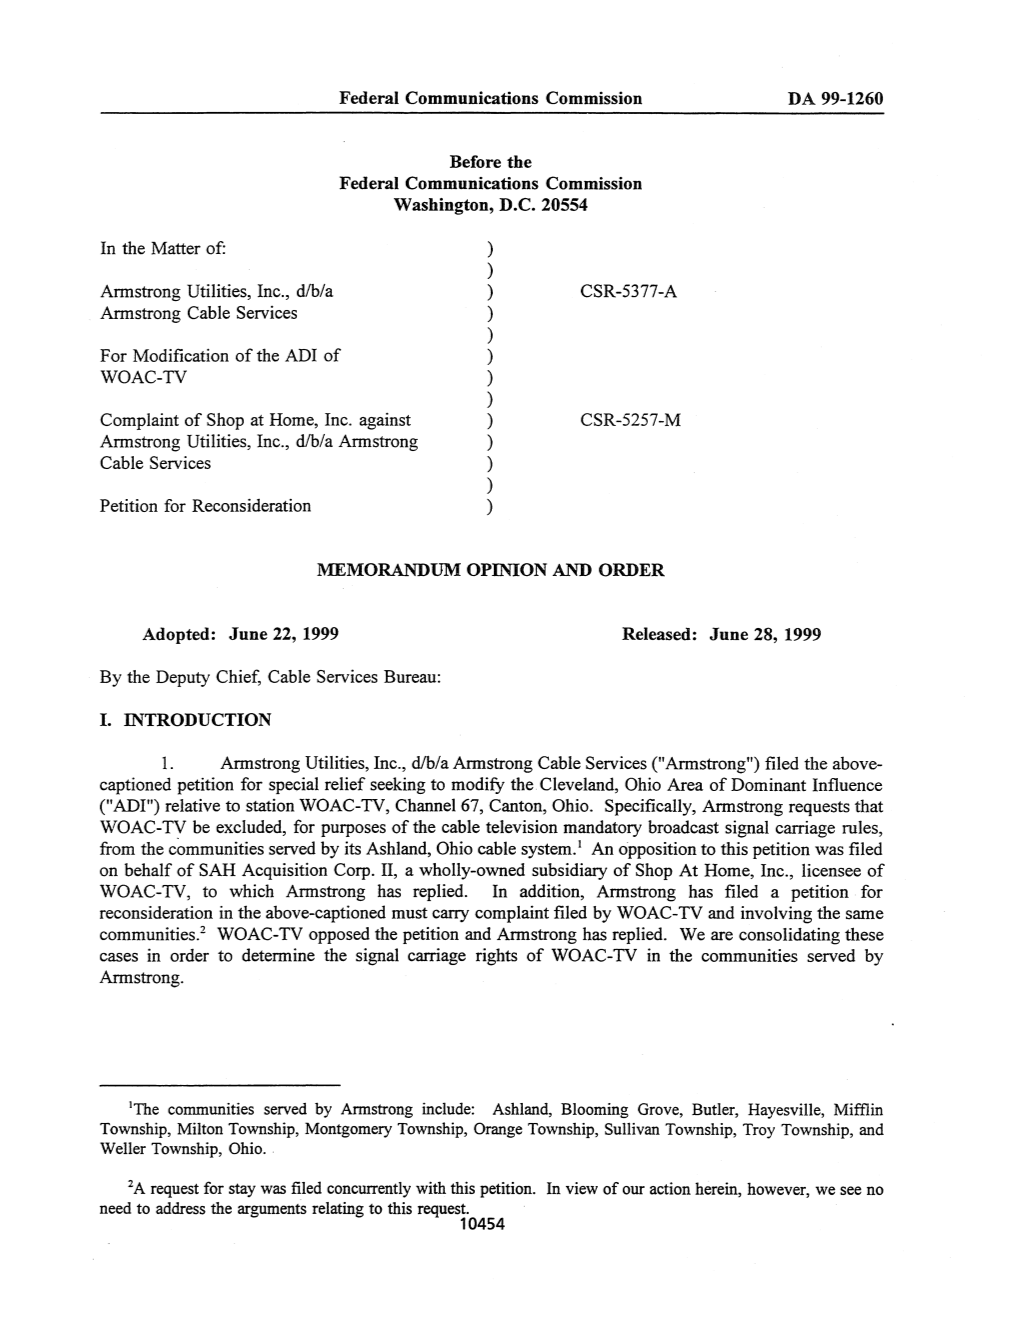 Armstrong Utilities, Inc., D/B/A ) CSR-5377-A Armstrong Cable Services ) ) for Modification of the ADI of ) WOAC-TV ) ) Complaint of Shop at Home, Inc